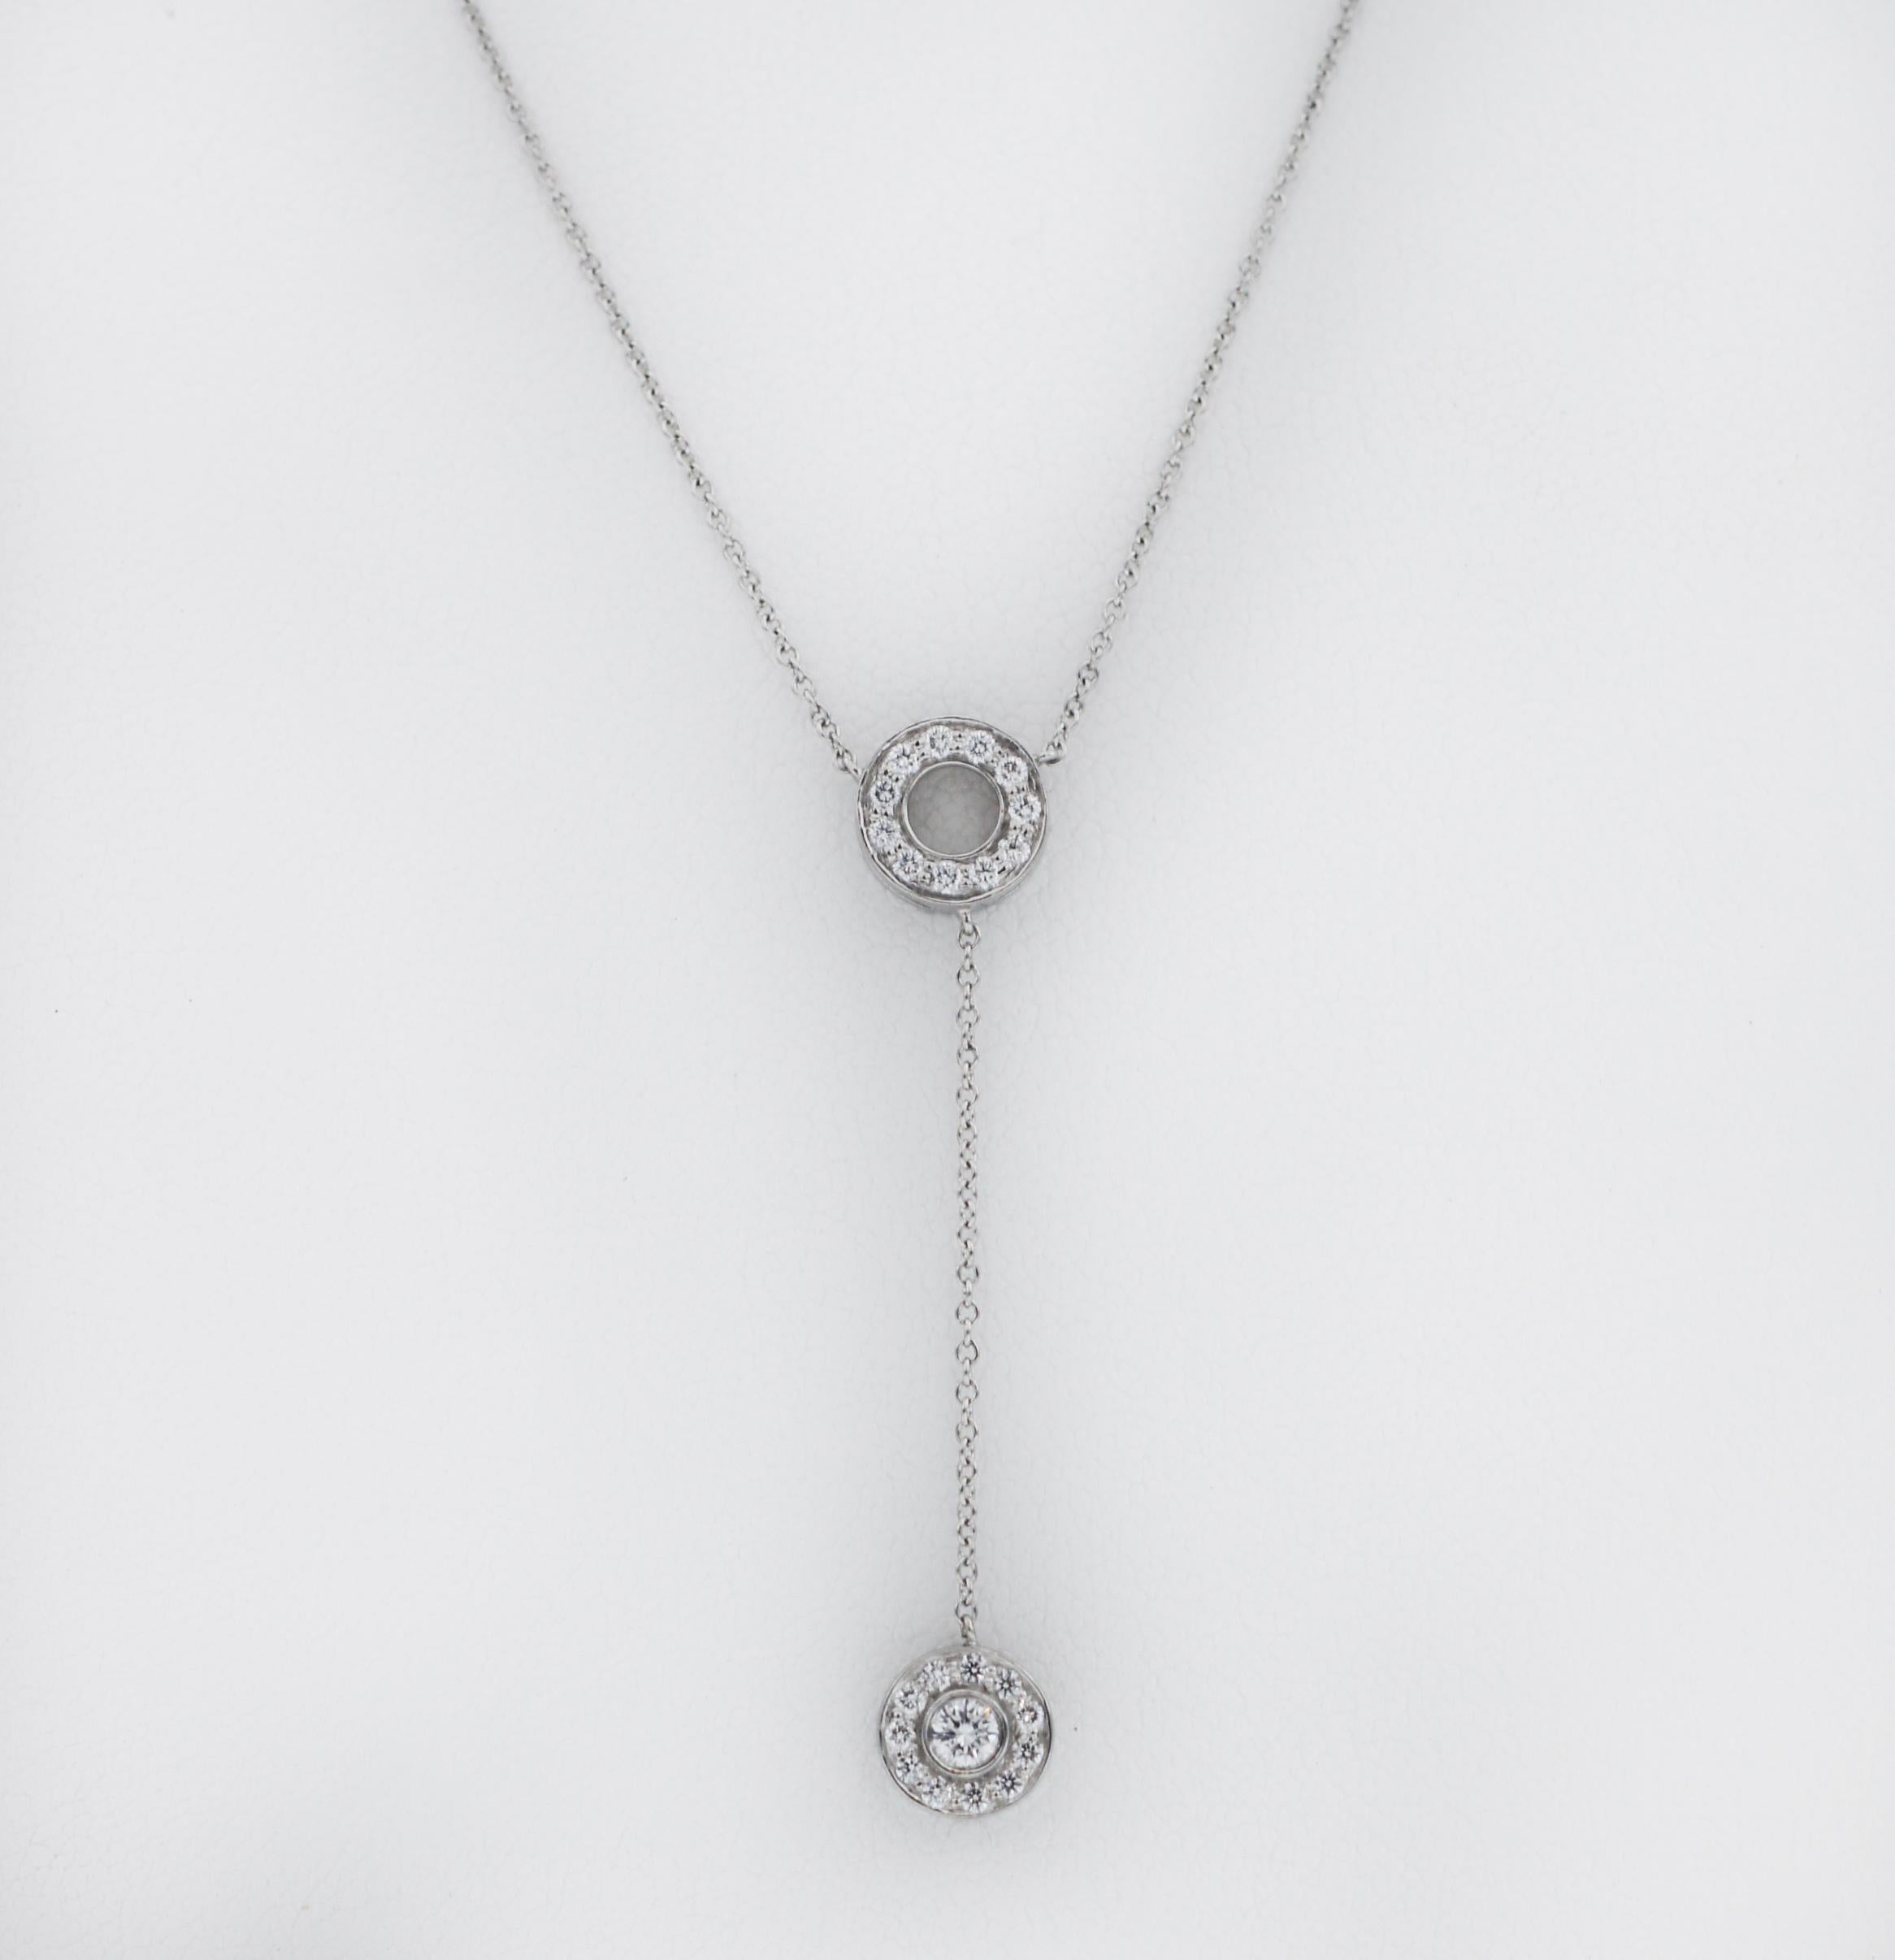 Tiffany & Co.
Platinum (PT950)
Circlet Collection Necklace
Lariat style Pendant
Circlet connecting Pendant Approx. 9mm diameter
Circlet Drop Pendant Approx. 8mm diameter
Chain 16